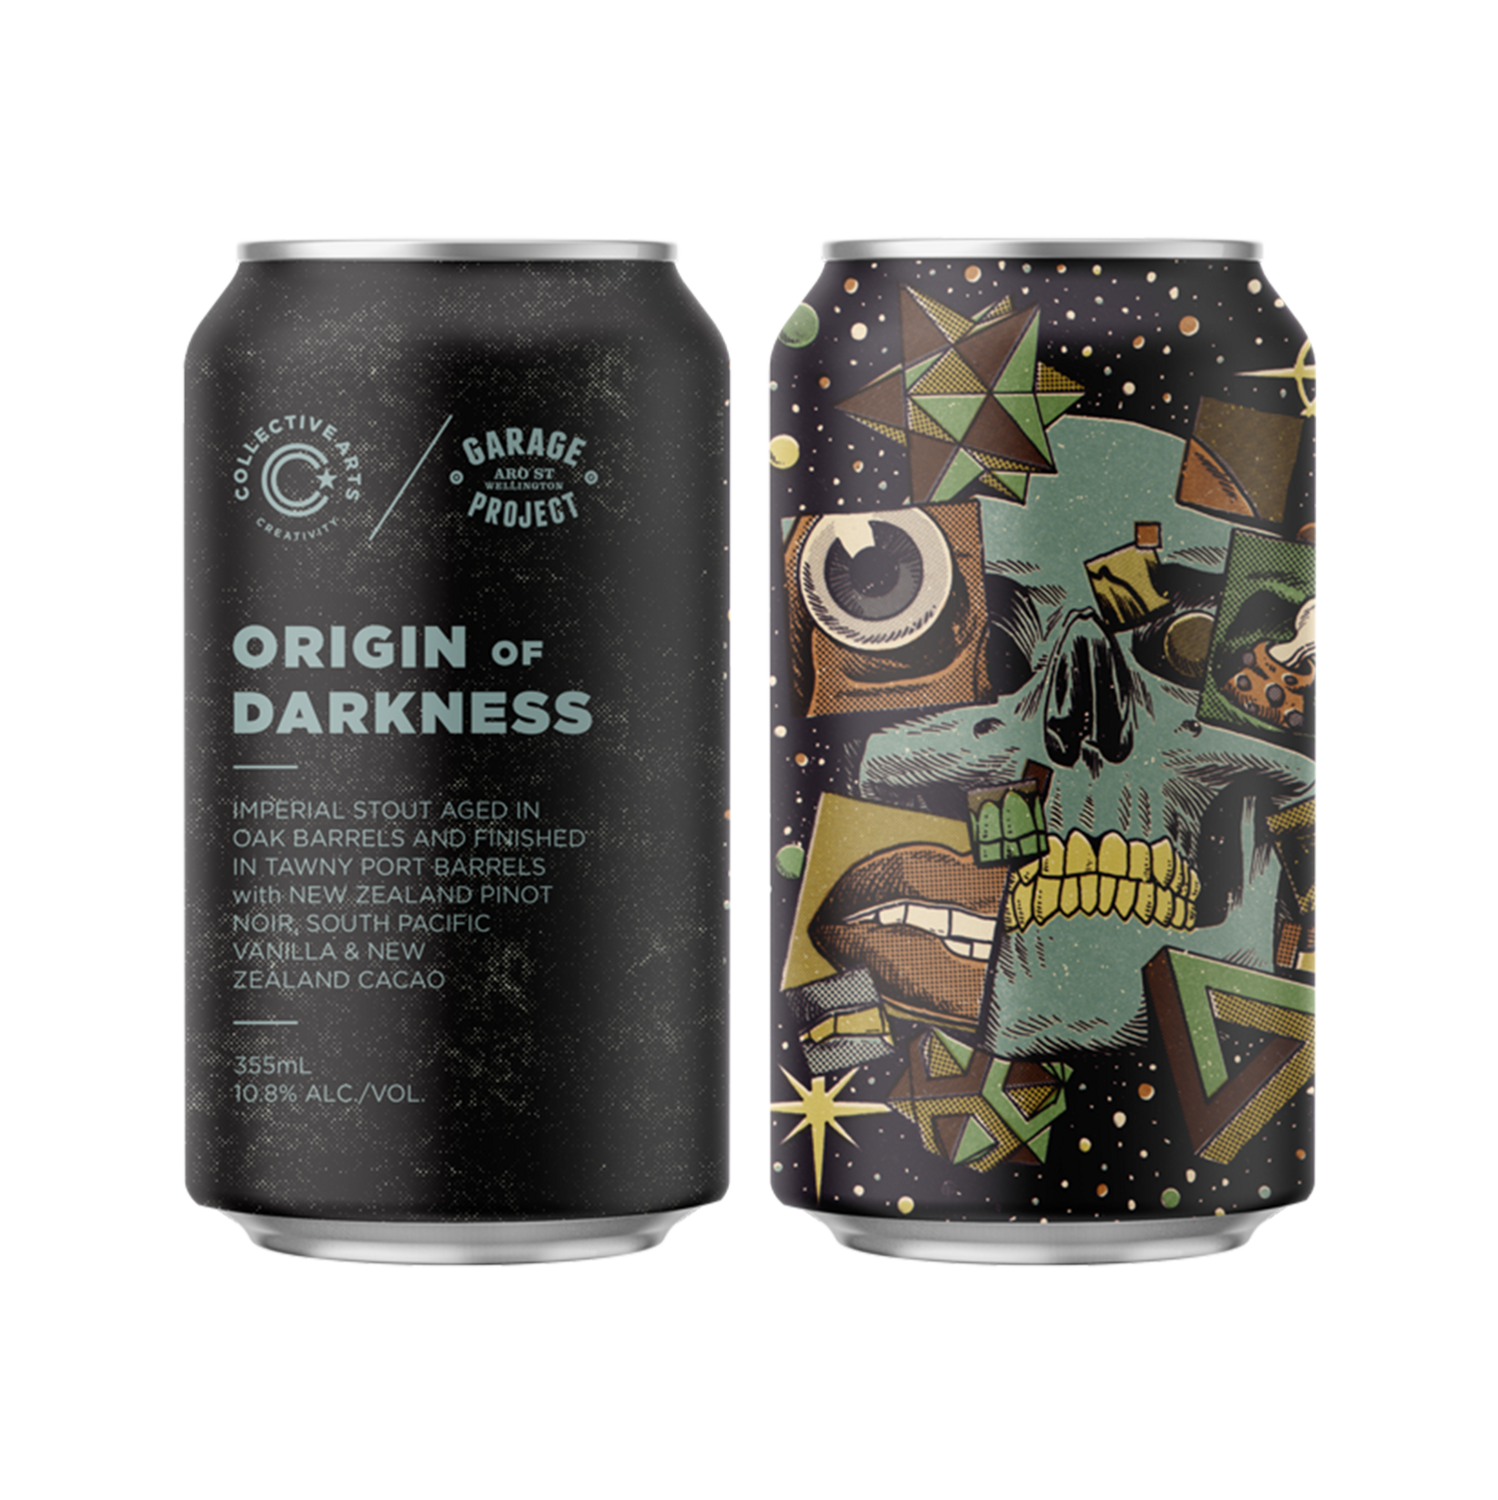 Collective Arts x GARAGE PROJECT Origin of Darkness BA Imperial Stout